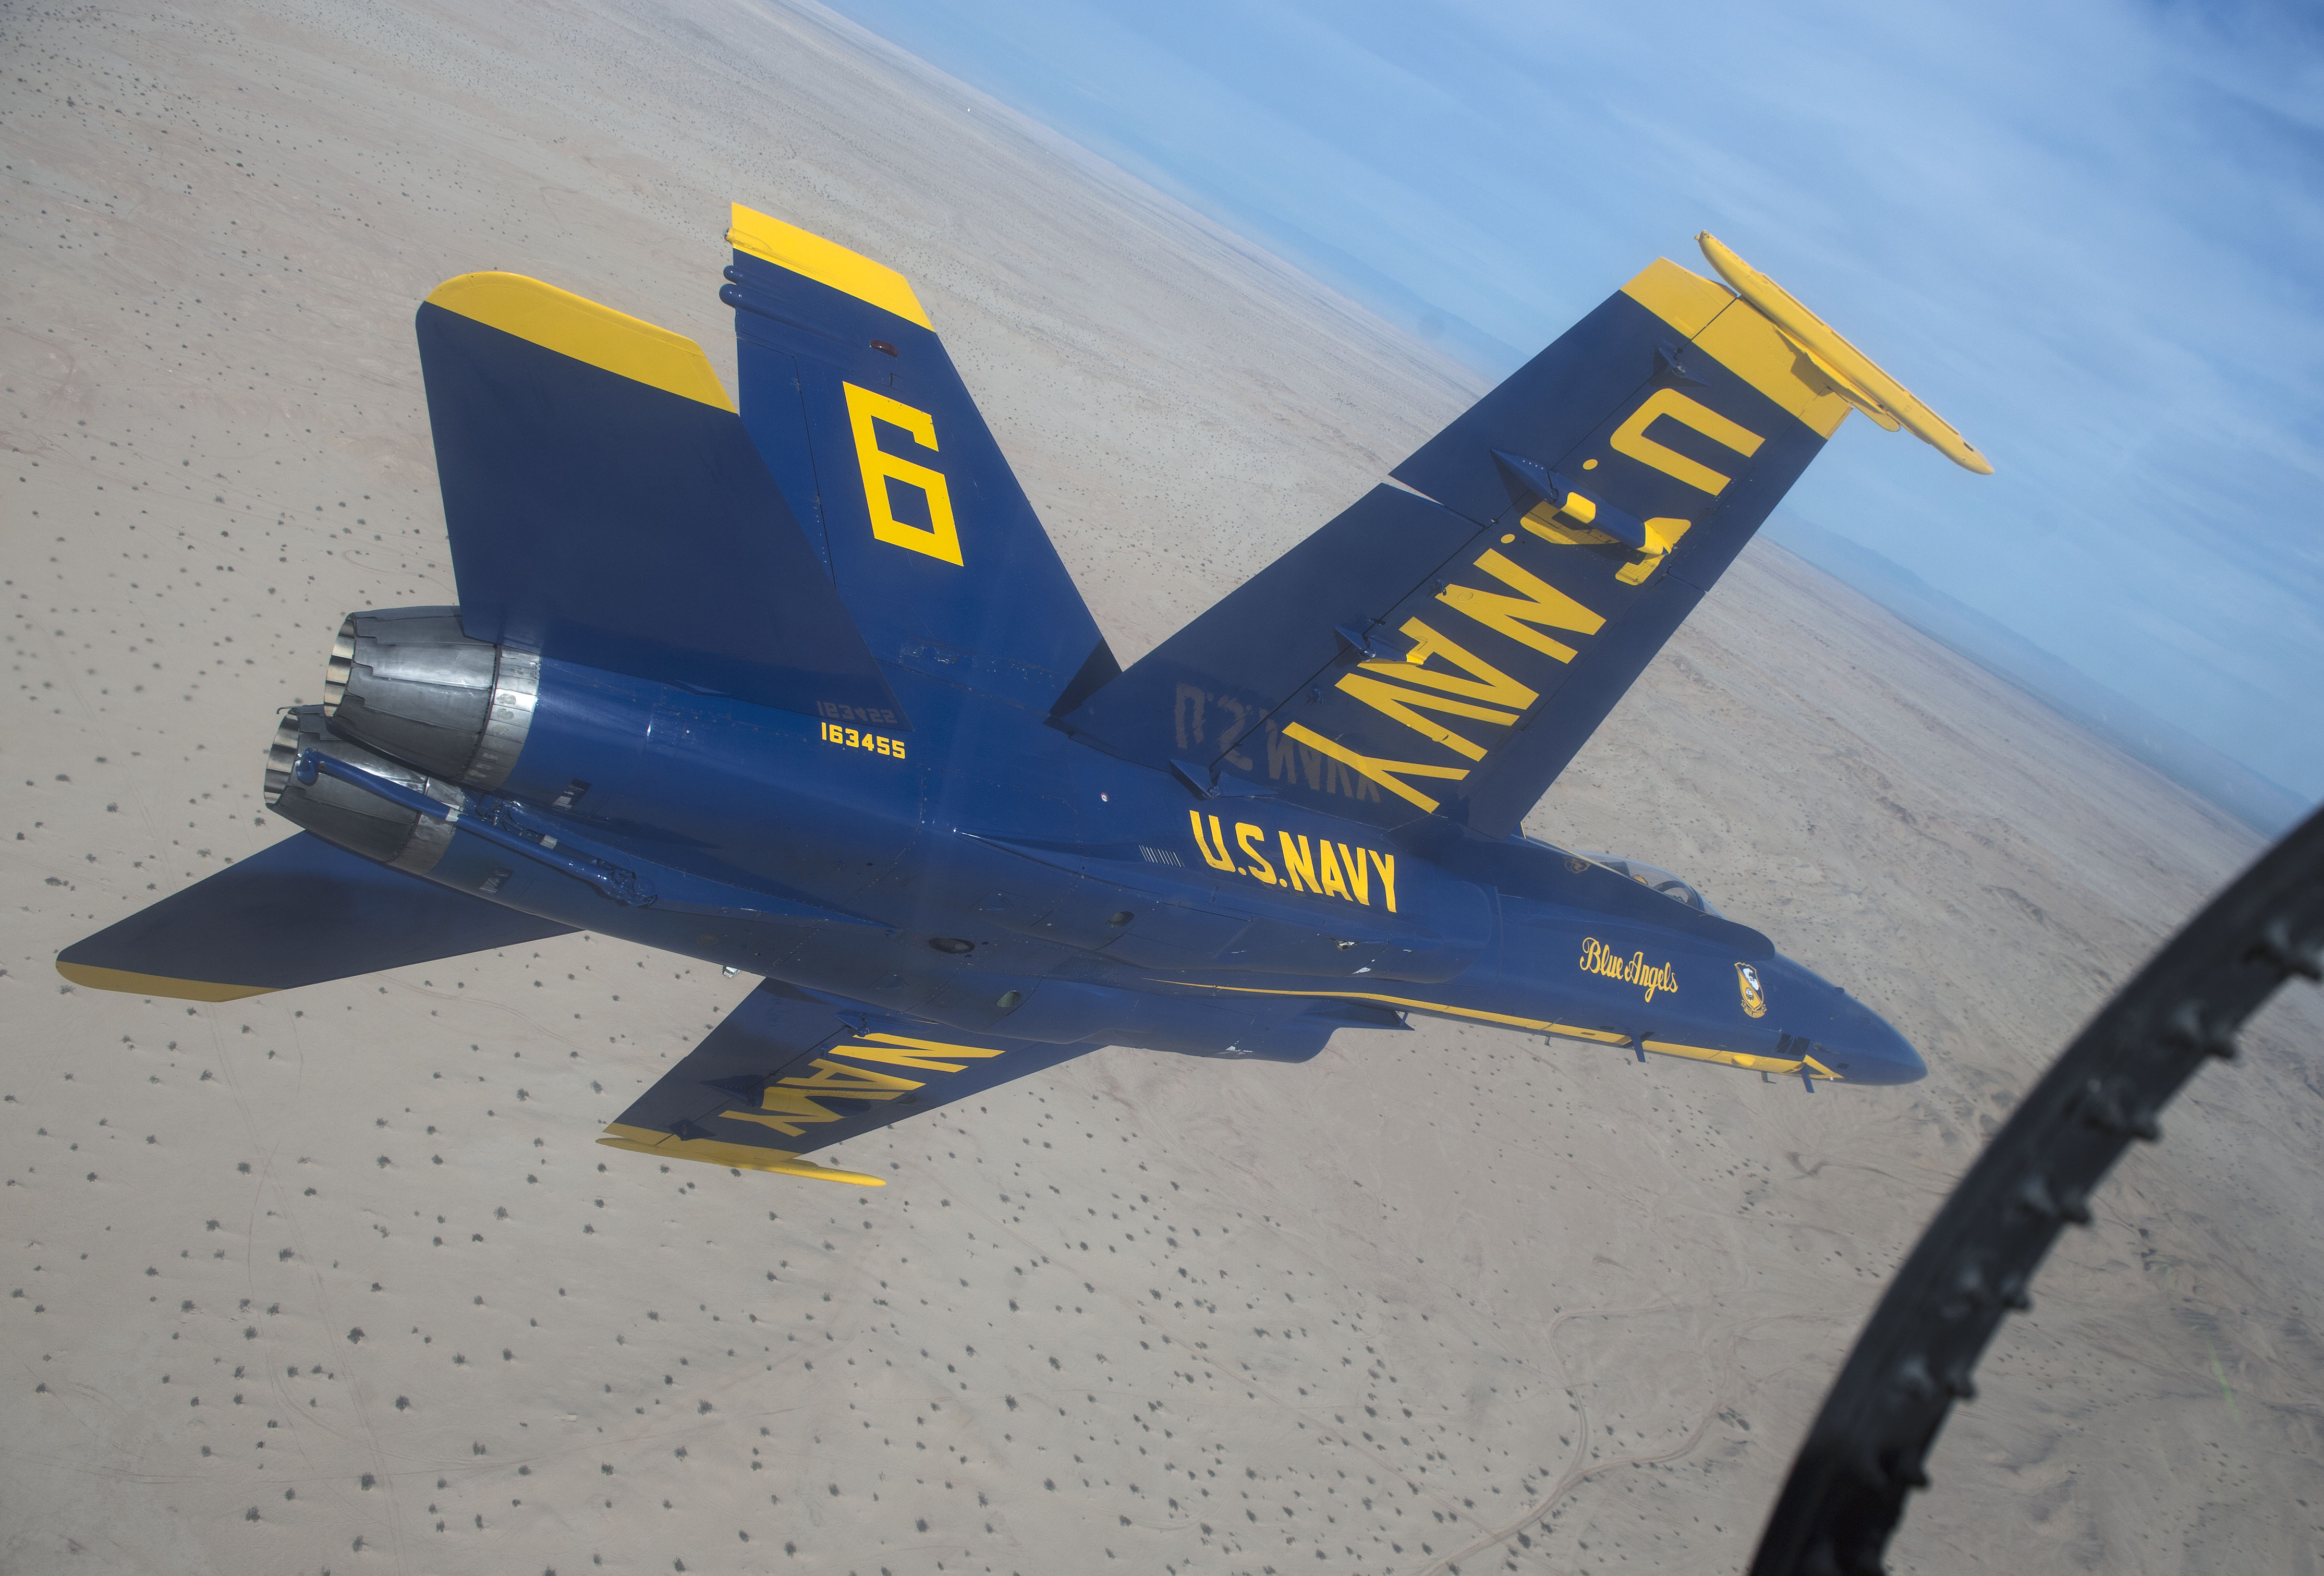 BREAKING: Blue Angels F/A-18 Crashes in Tennessee